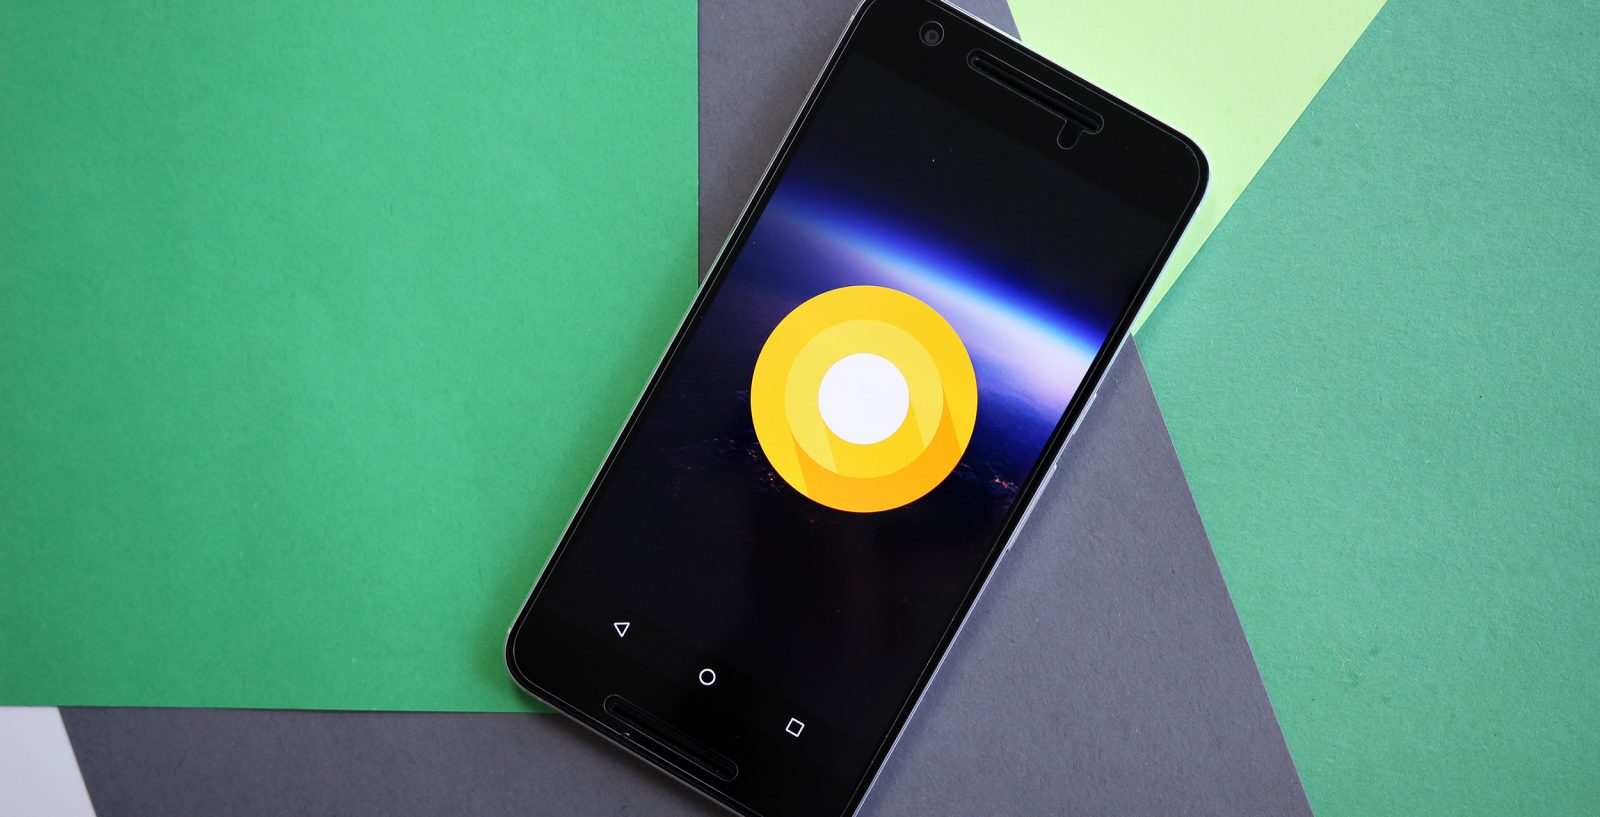 How to take advantage of the features of Android O without Android O